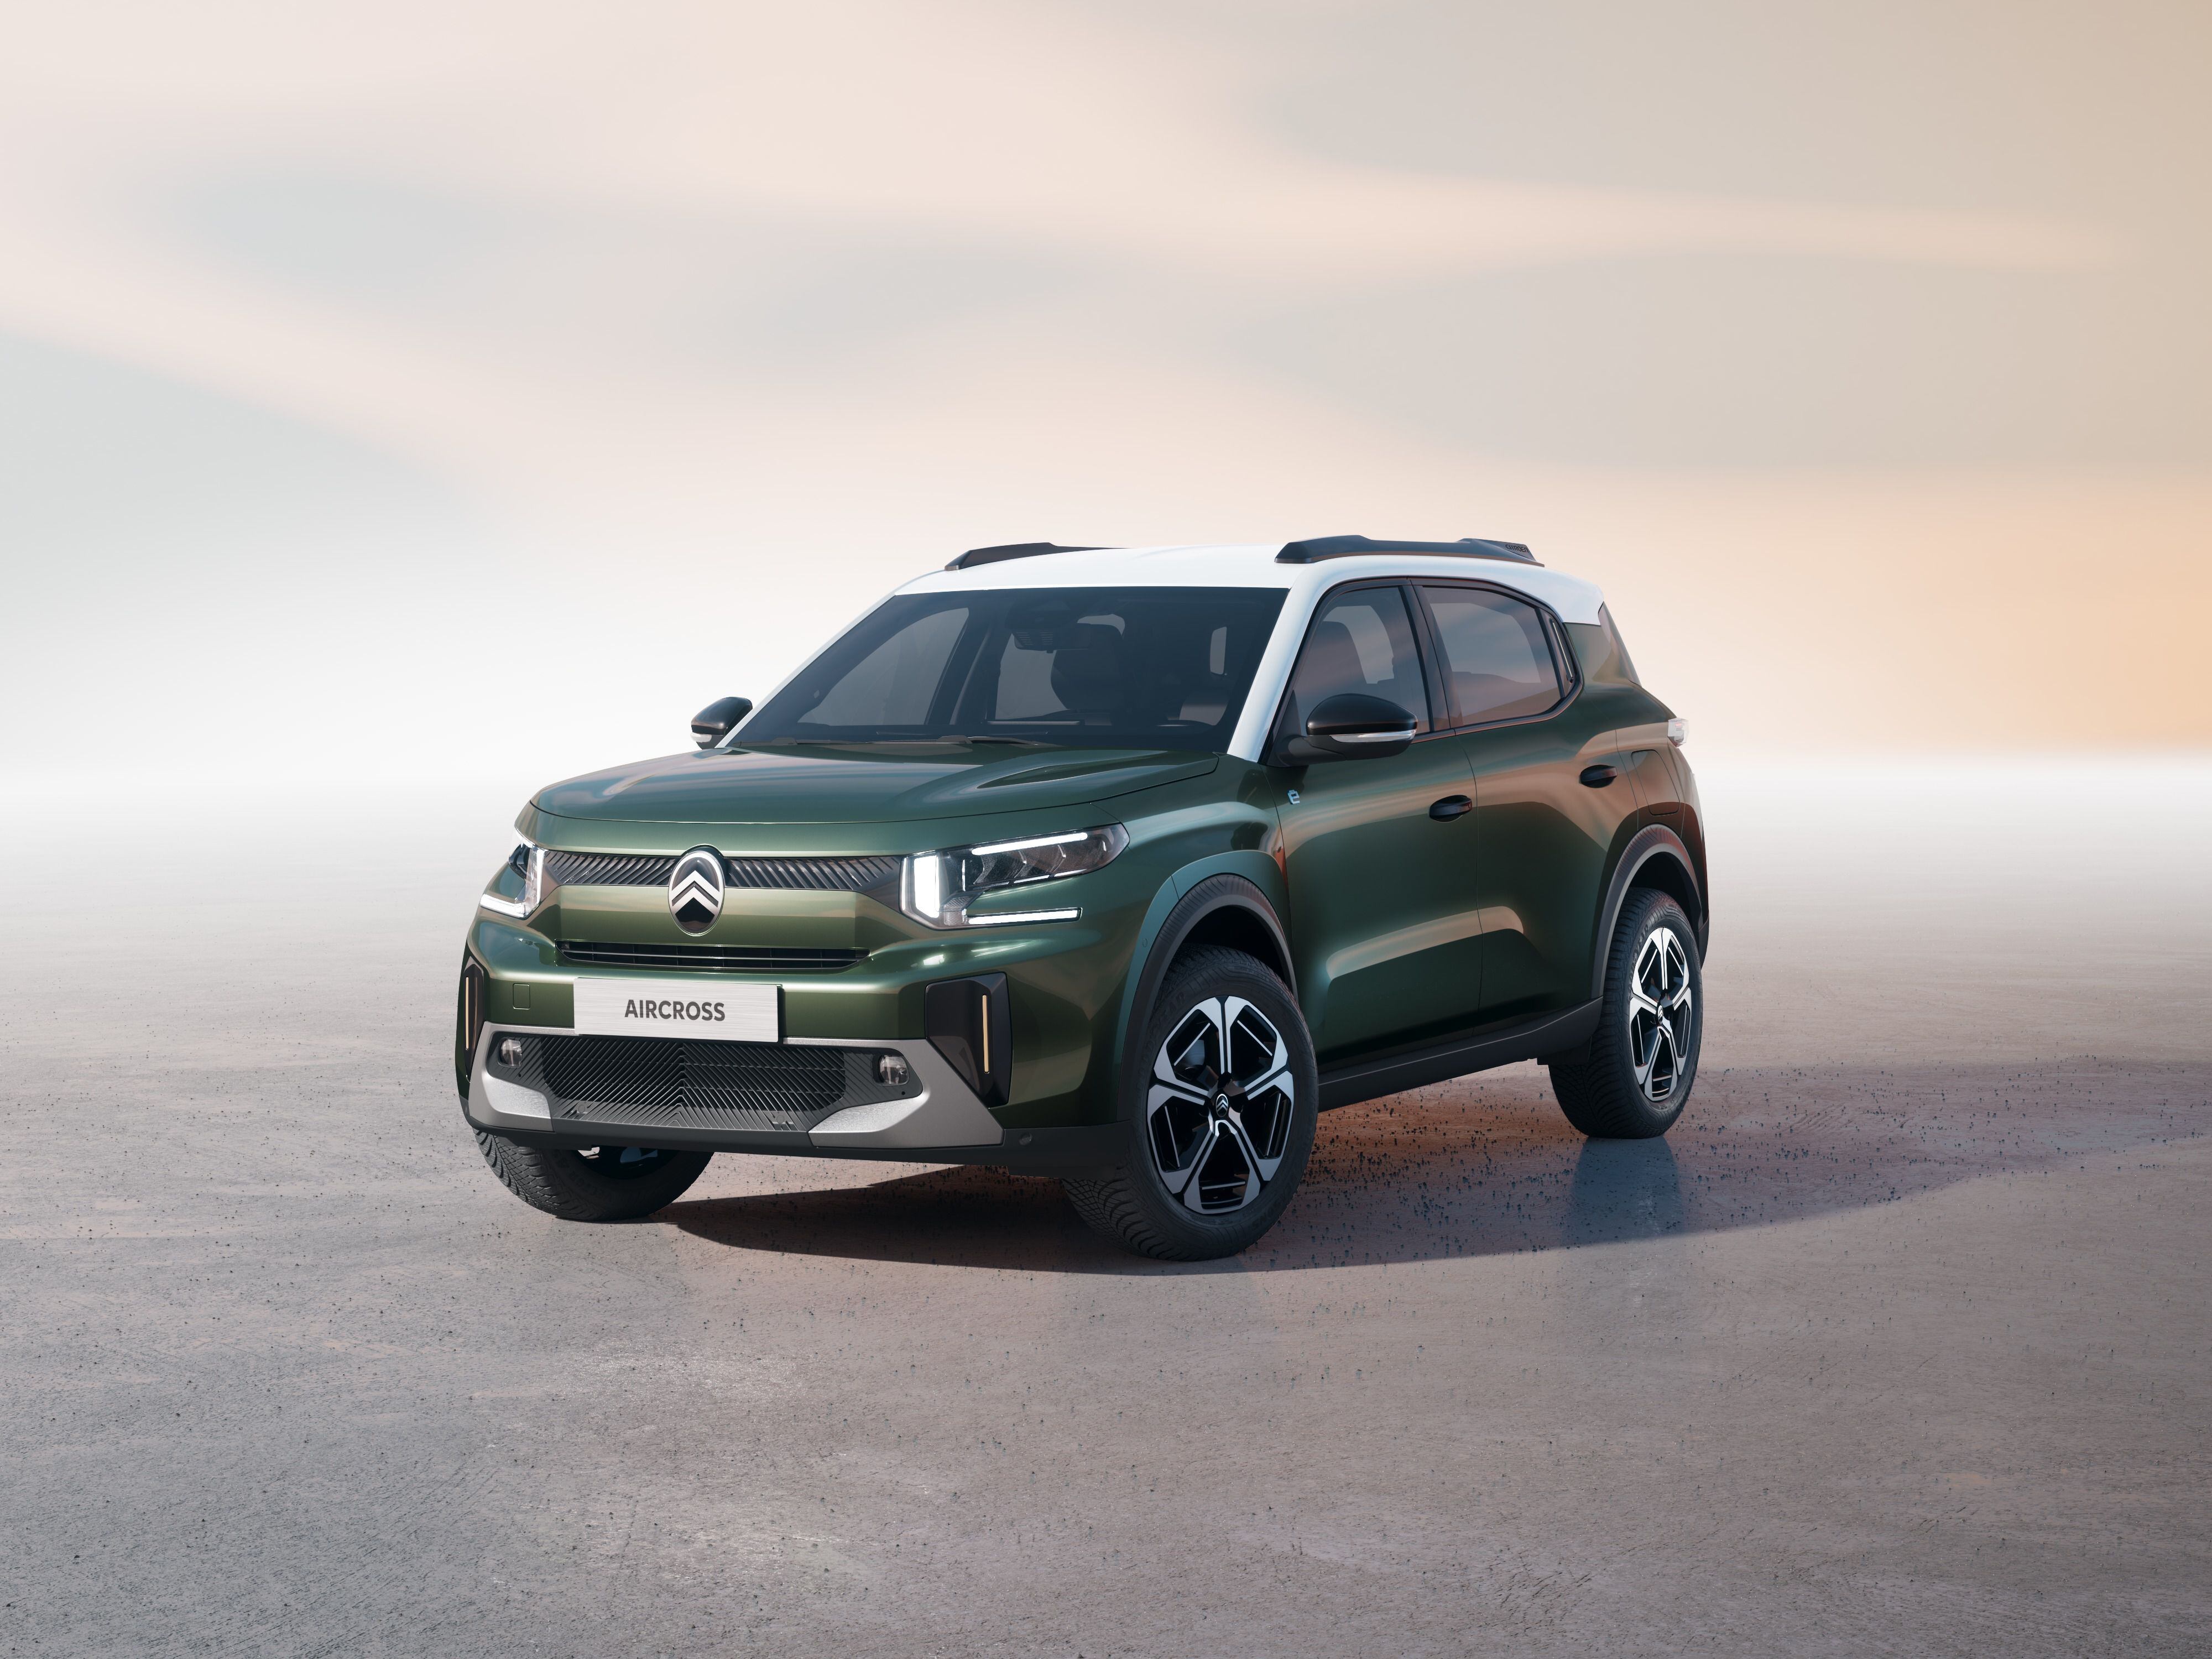 New Citroen C3 Aircross will come with seven seats